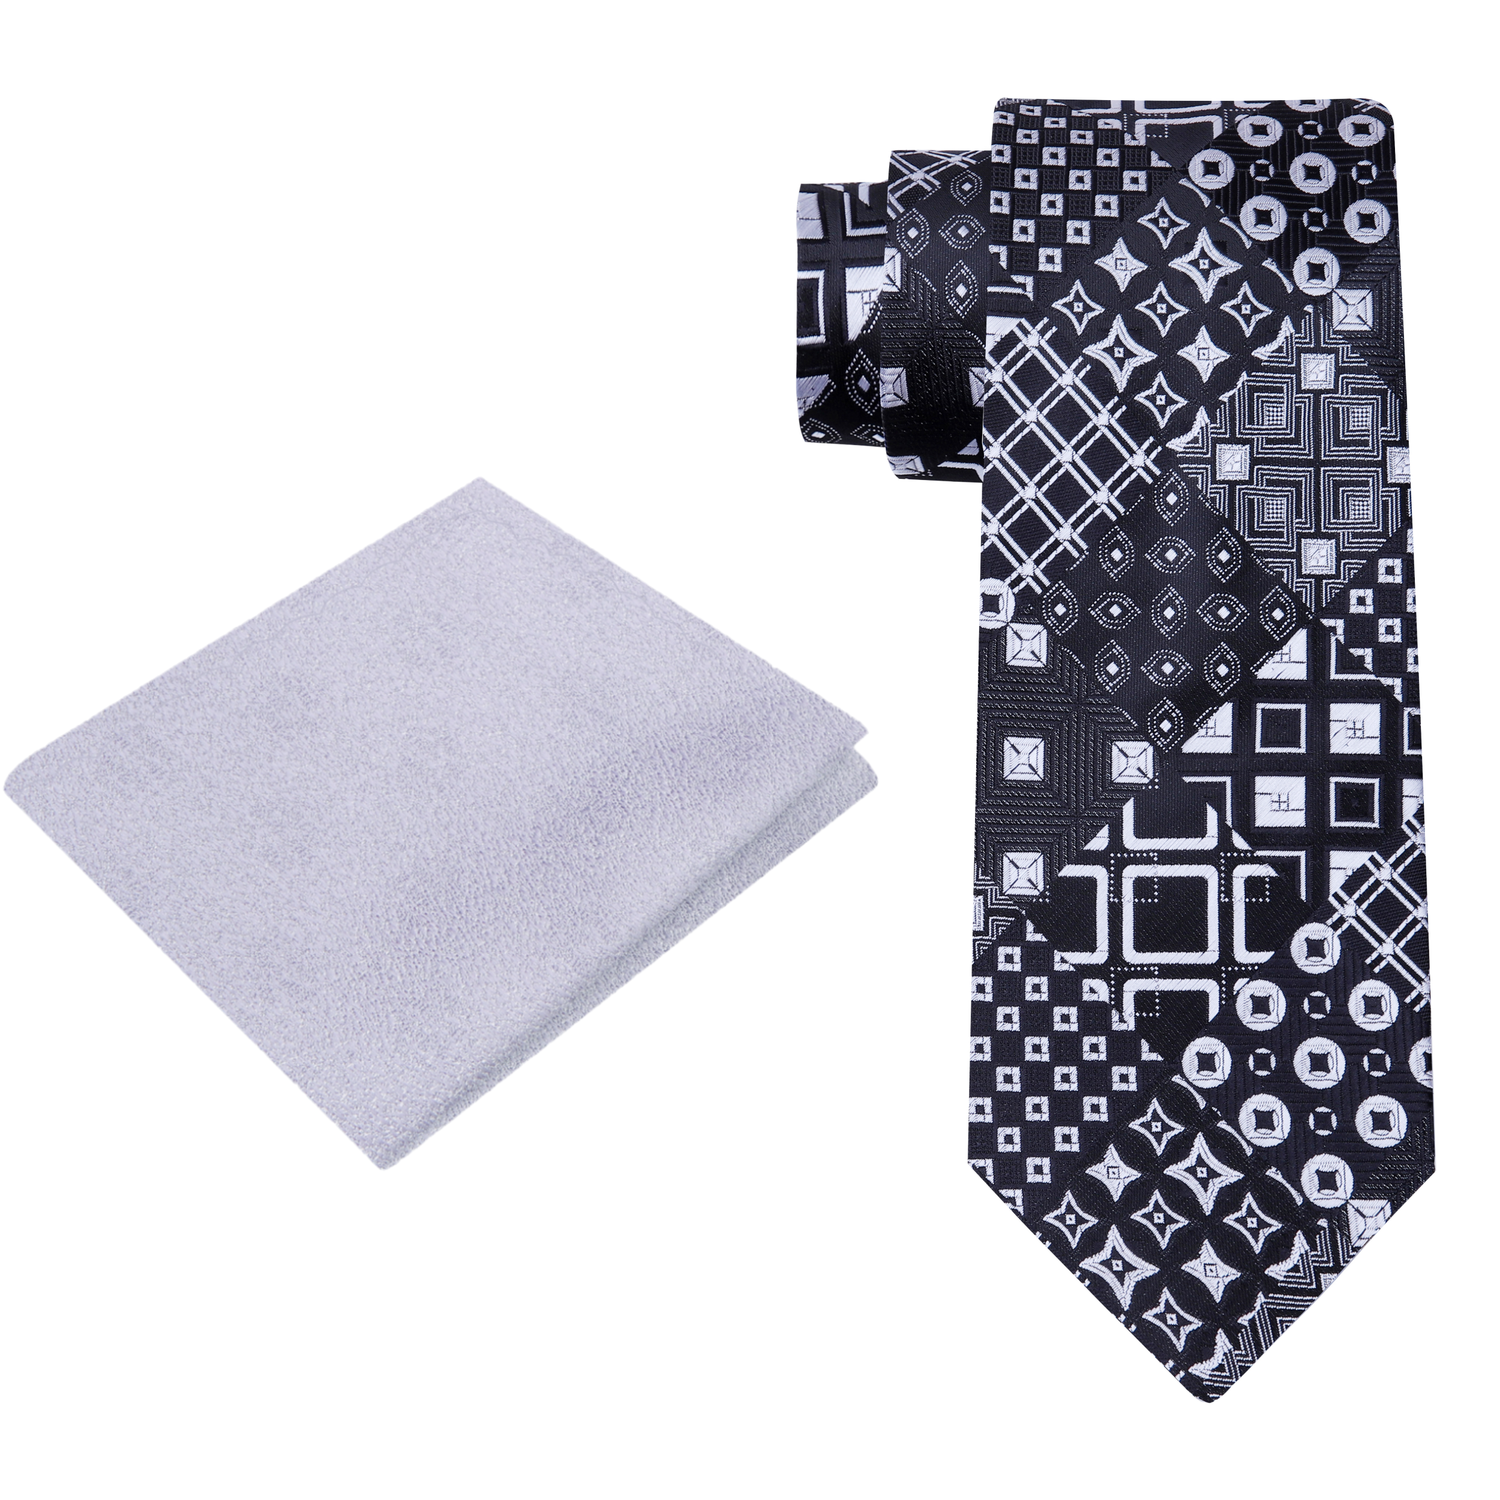 Alt View: Black, Grey Abstract Tie with Silver Square